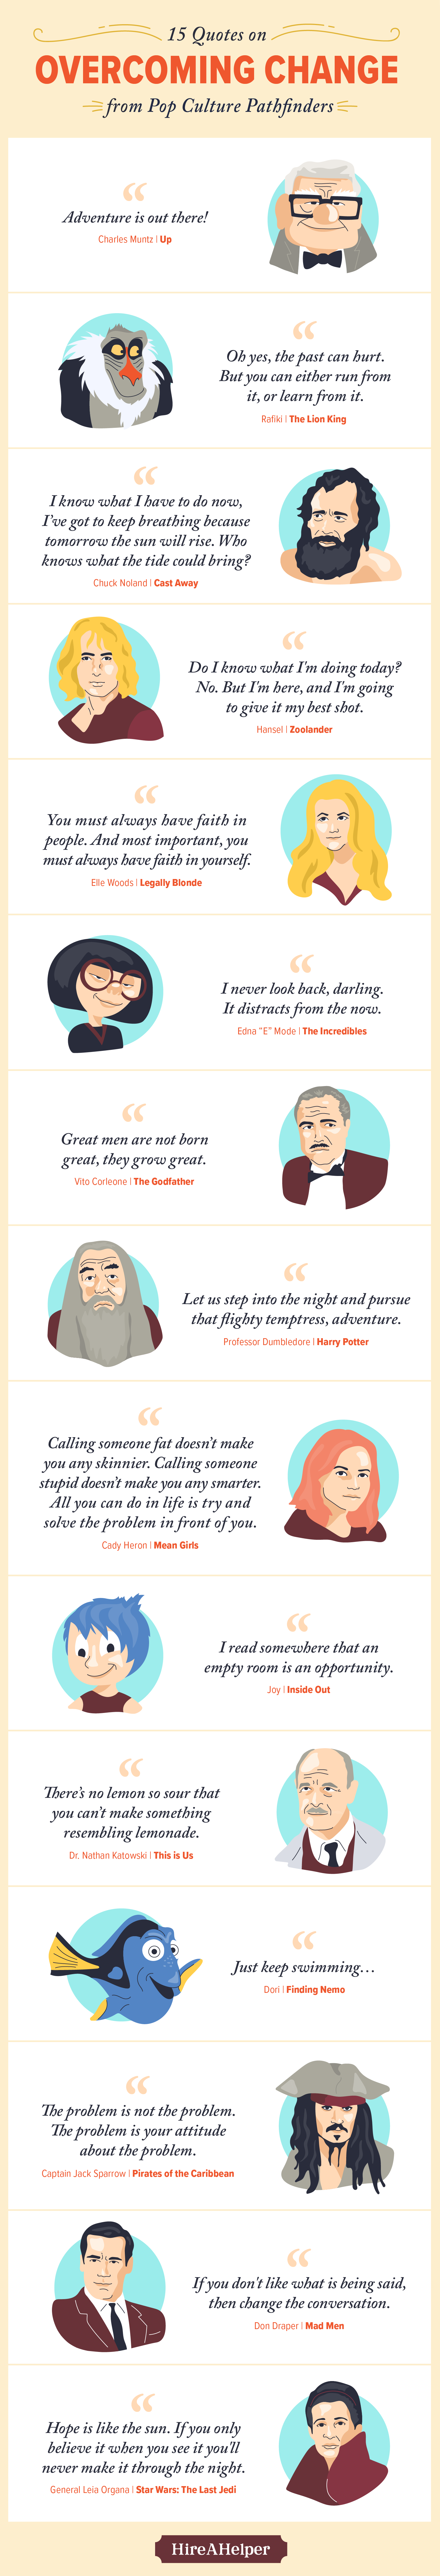 Starting Afresh: 15 Inspiring Movie Quotes to Help the Transition - Infographic